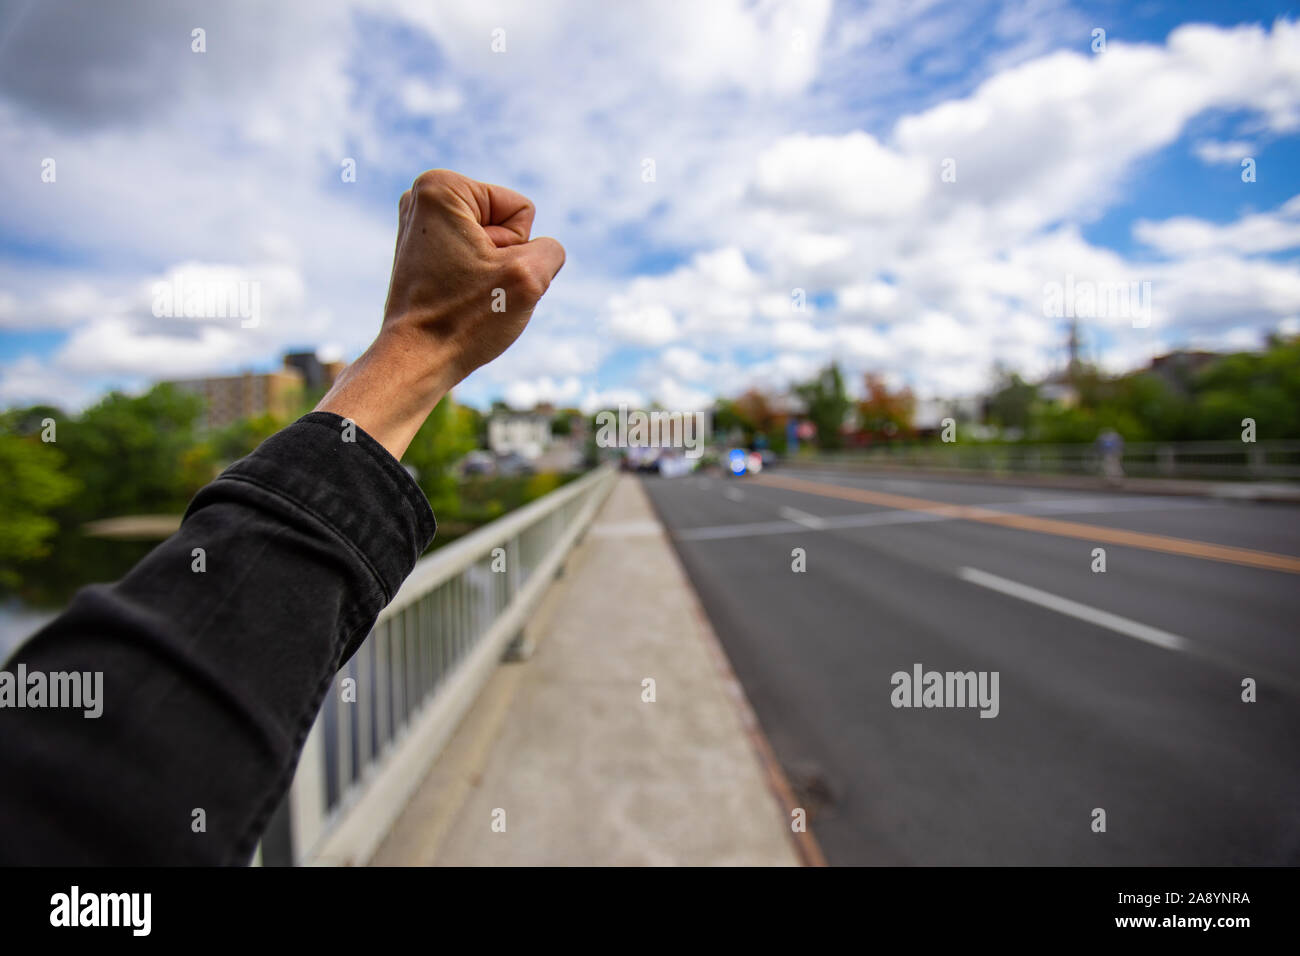 First person perspective and Selective focus on man fist raised during an ecological protest. Crowd of people walking against climate change  Stock Photo